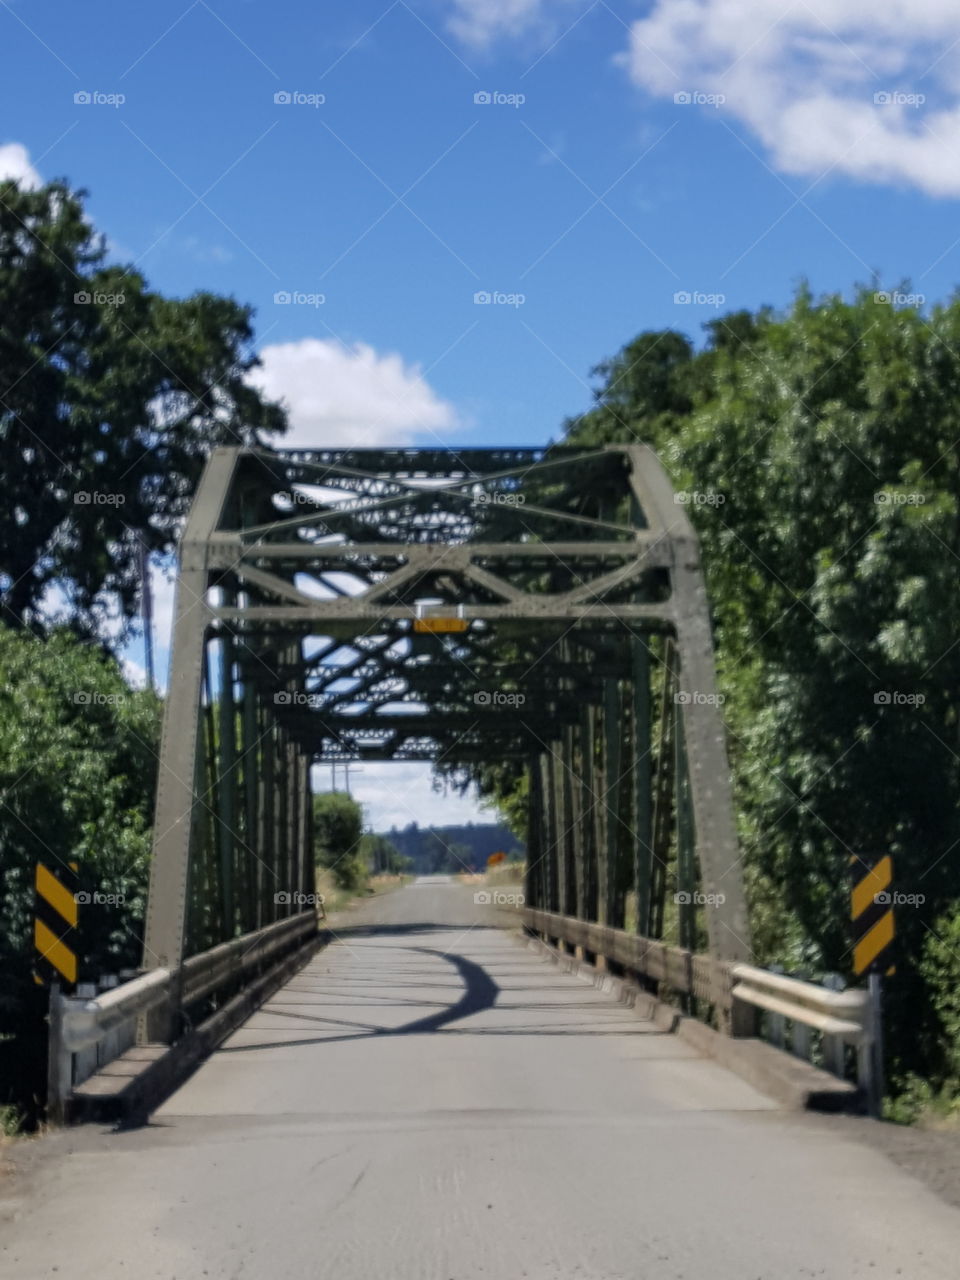 Steel Bridge on a Country Road